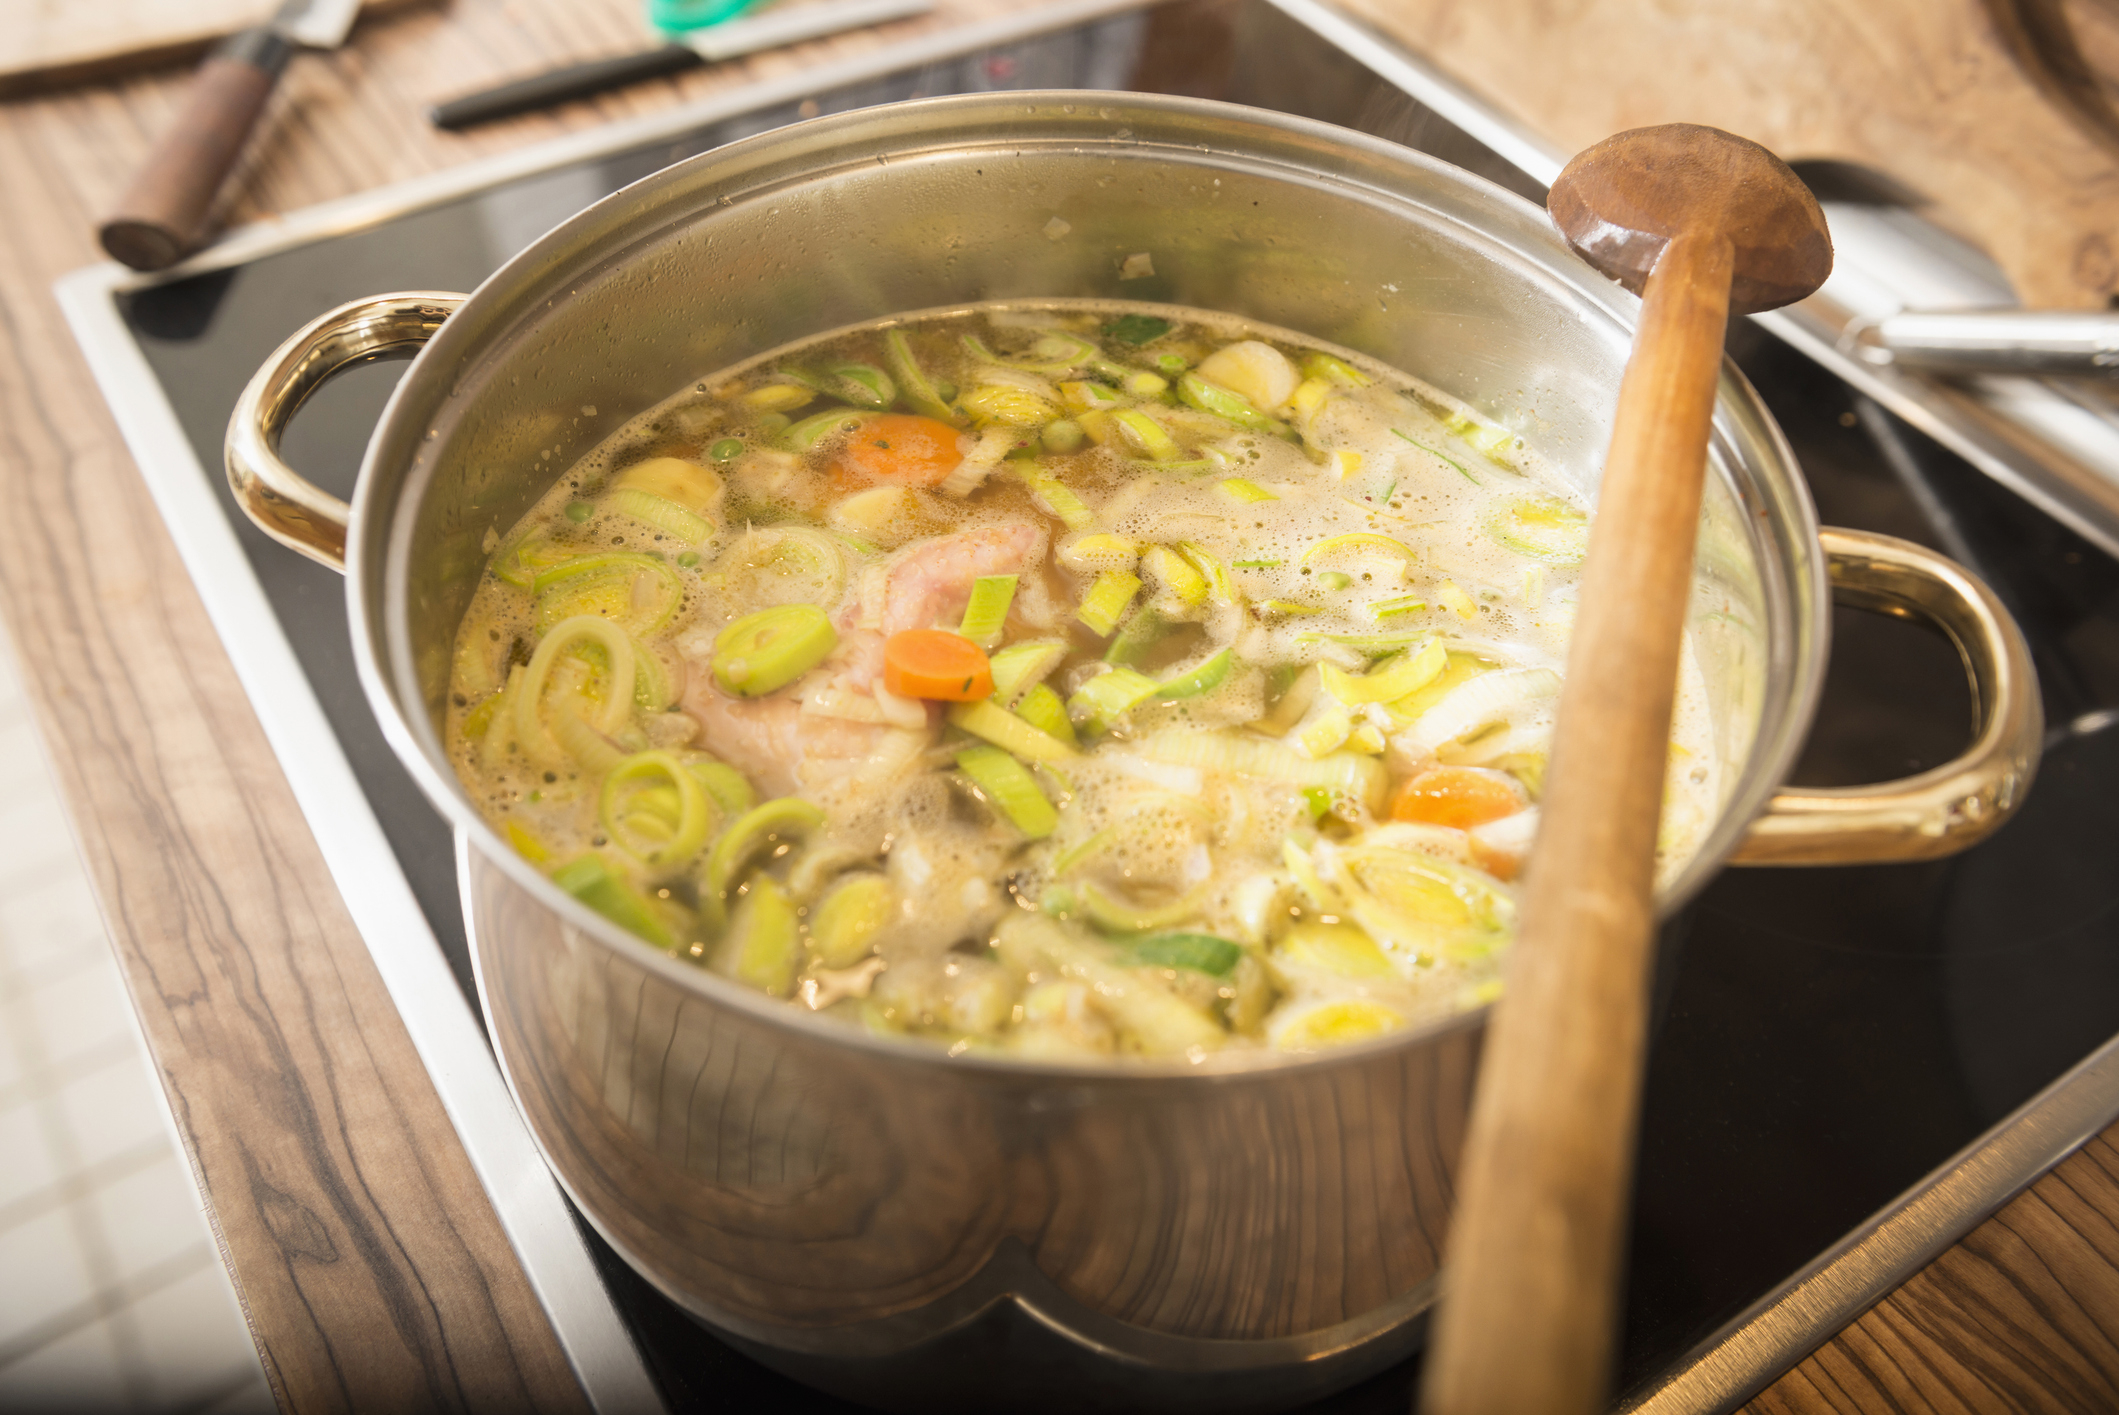 A pot of soup with various vegetables and chicken on a stove, wooden spoon resting on the side